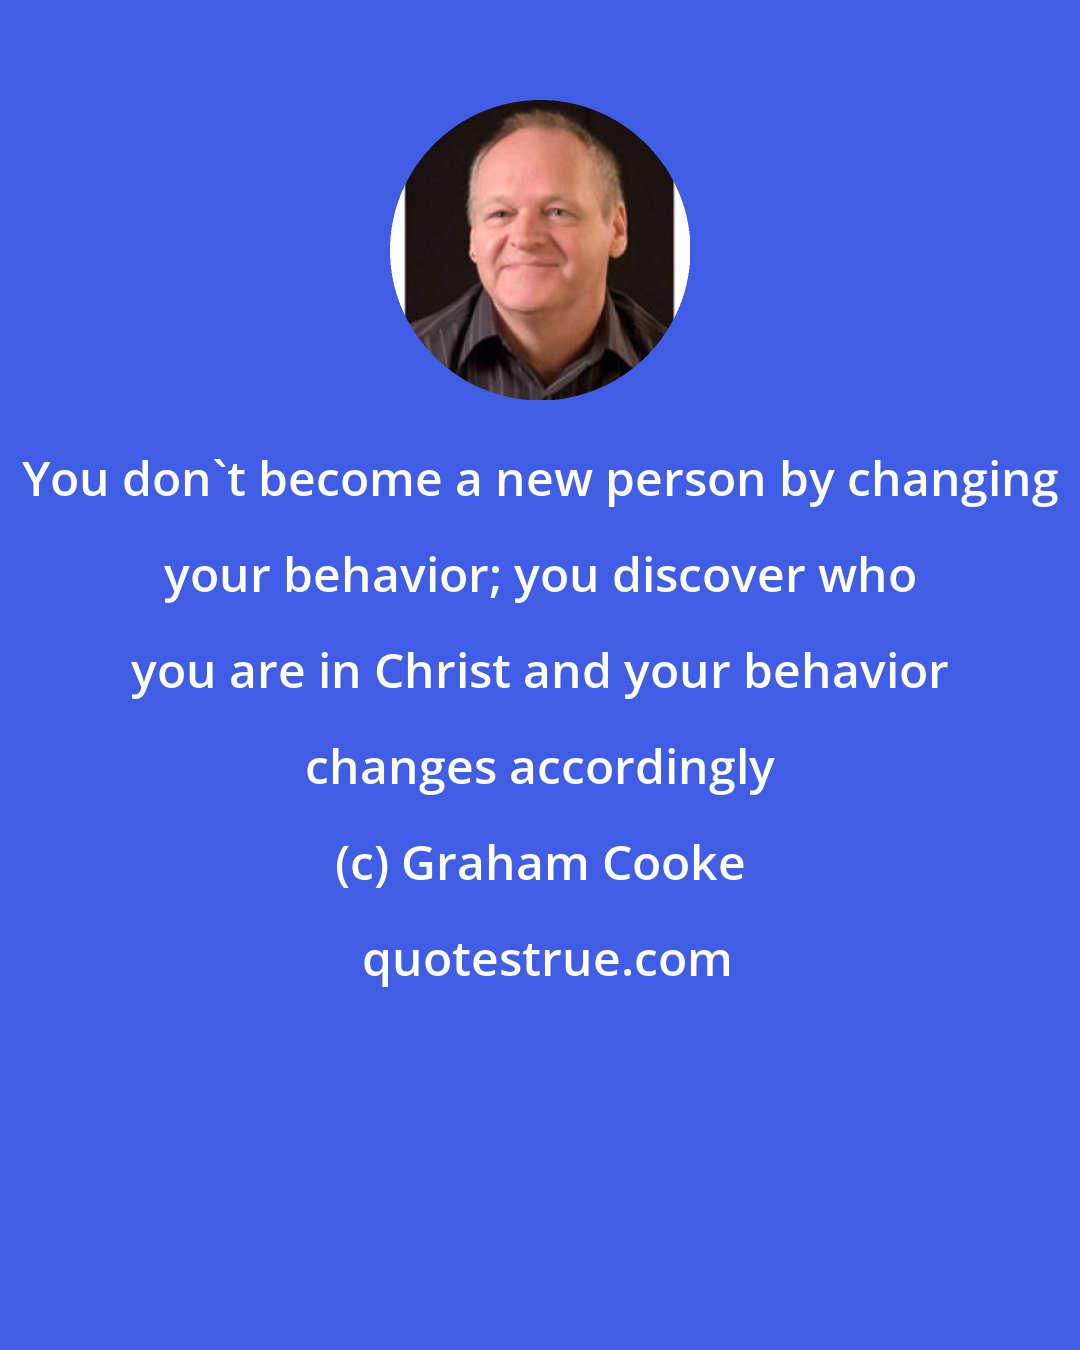 Graham Cooke: You don't become a new person by changing your behavior; you discover who you are in Christ and your behavior changes accordingly